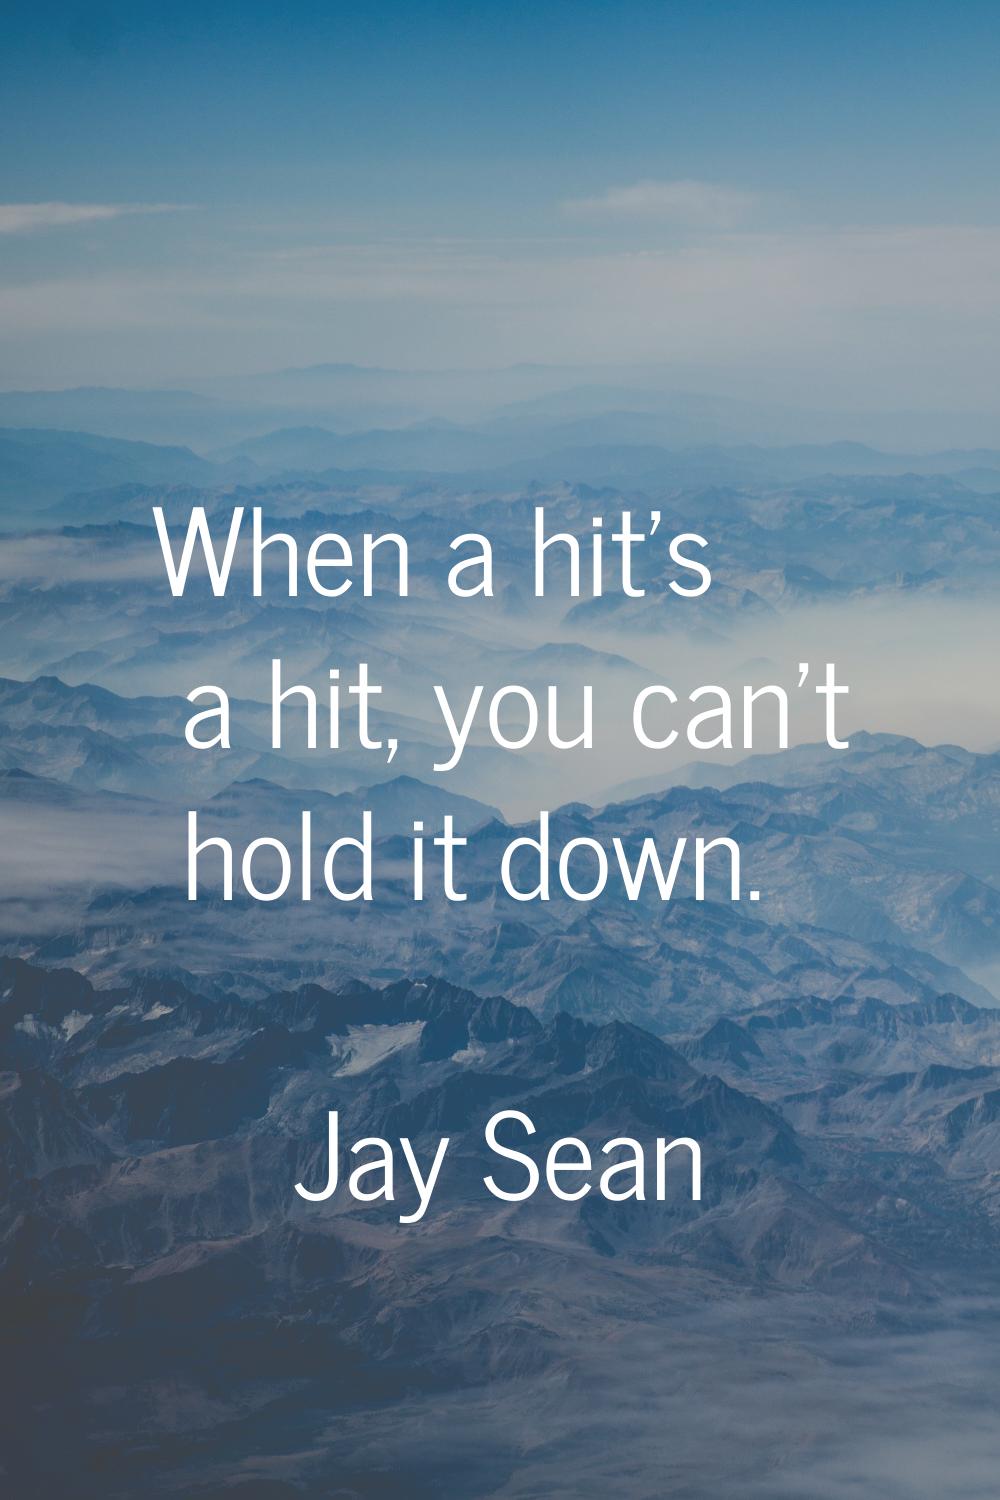 When a hit's a hit, you can't hold it down.